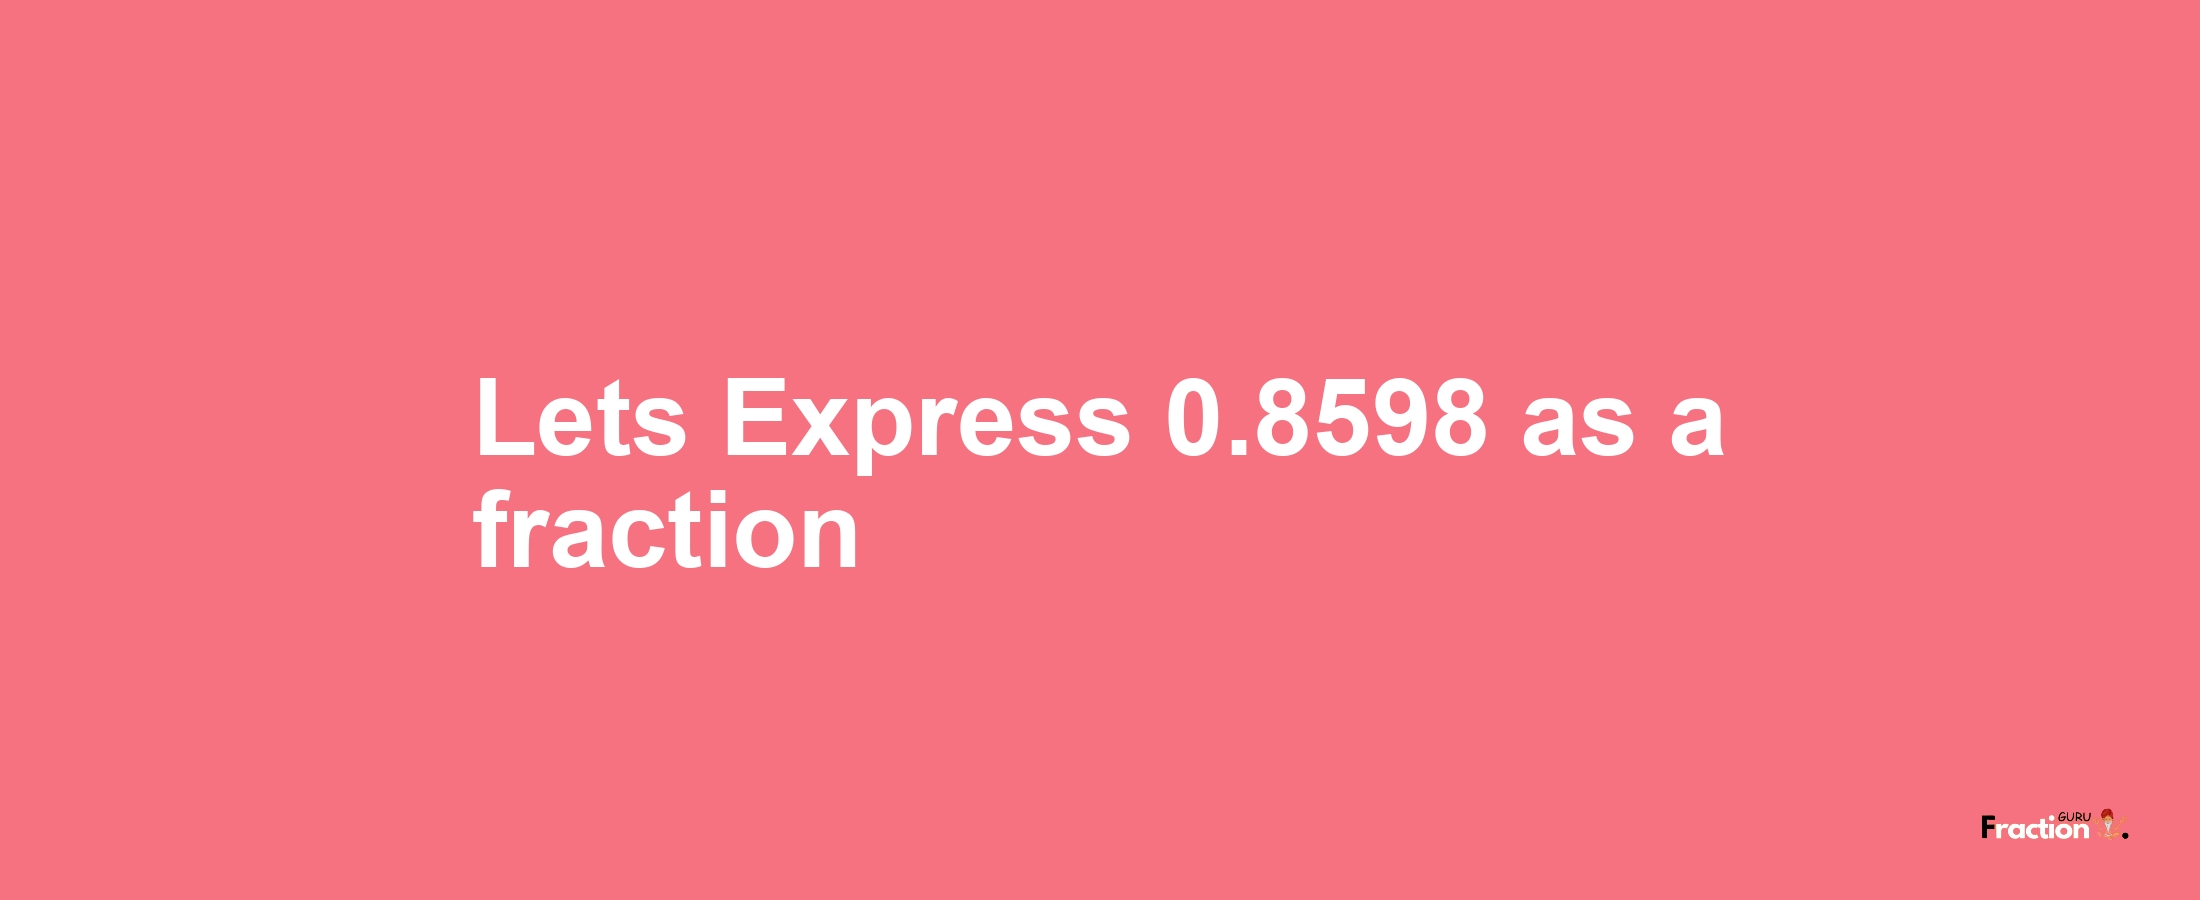 Lets Express 0.8598 as afraction